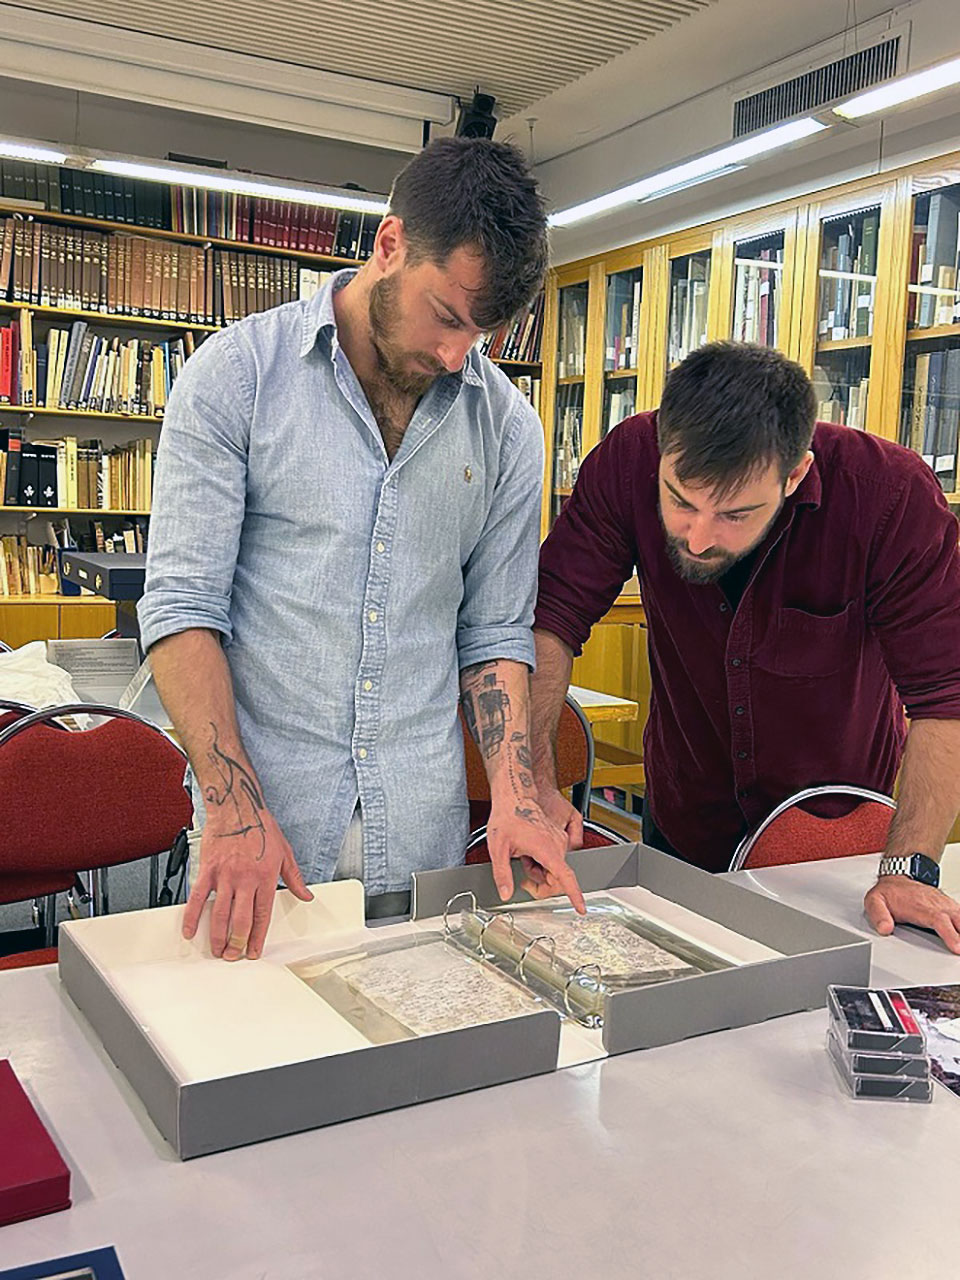 two young bearded men examine a notebook on a table in a library